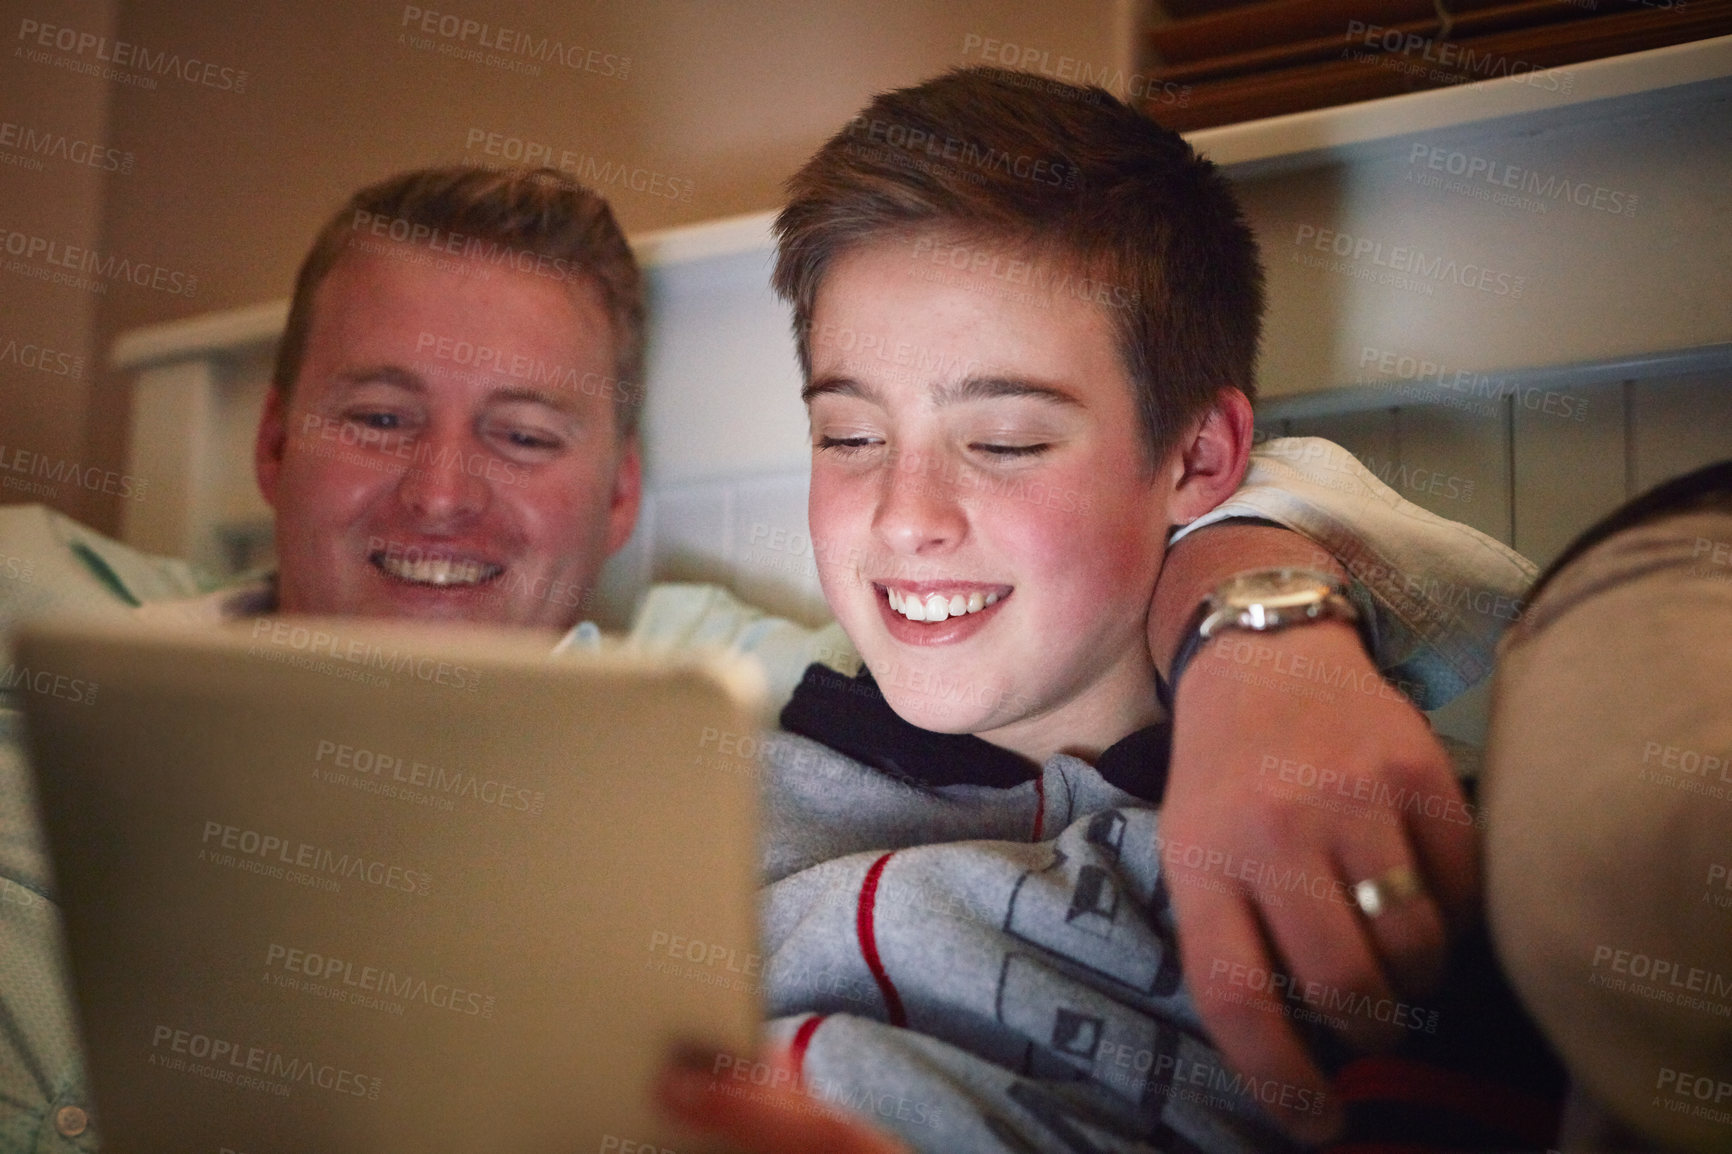 Buy stock photo Cropped shot of a father and son using a digital tablet together at night